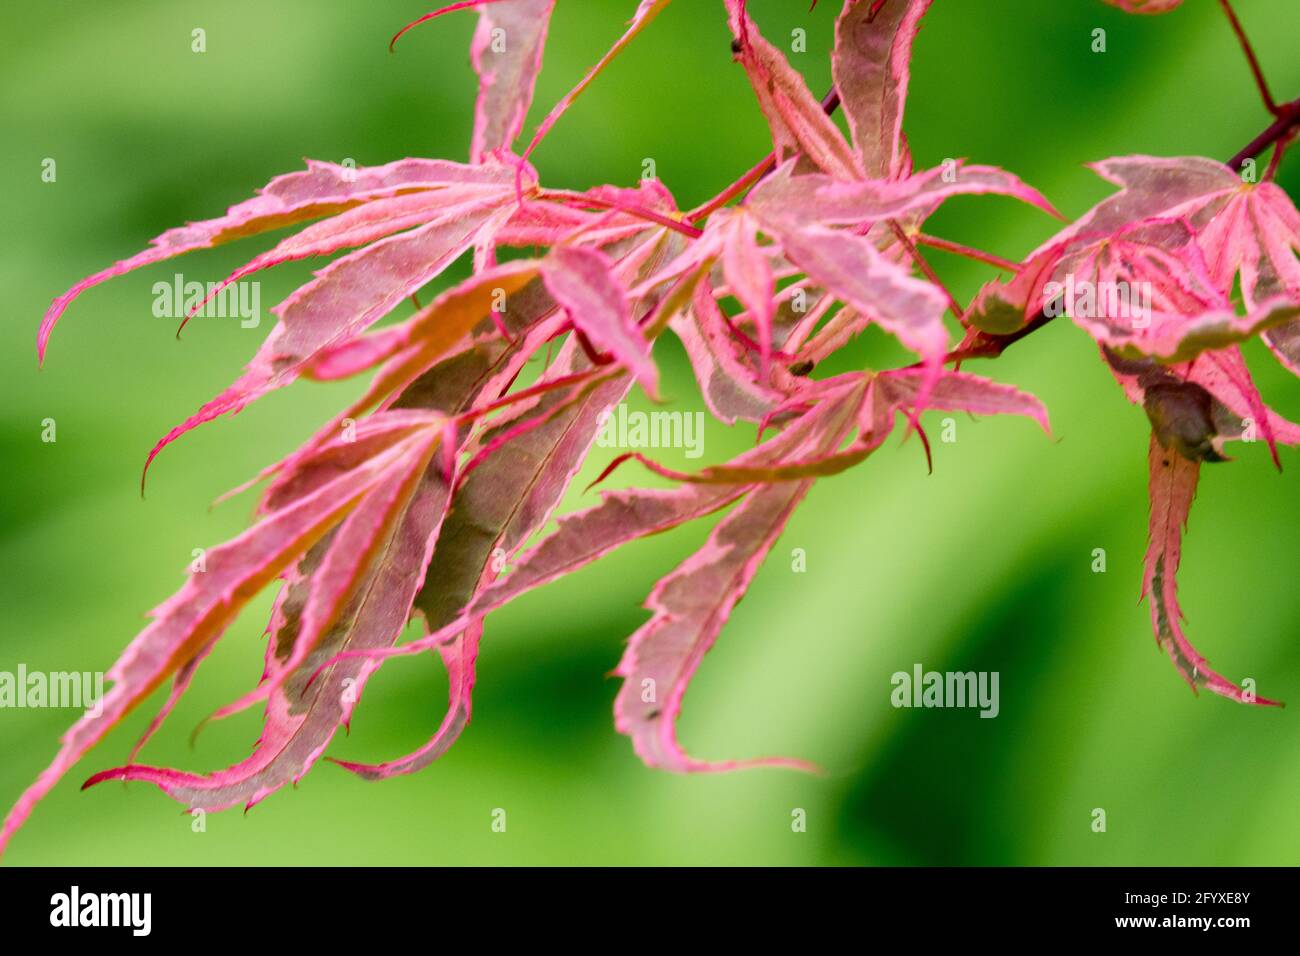 Acer palmatum Geisha Gone Wild Japanese Maple The new spring foliage is brilliant pink, purple and curl Stock Photo